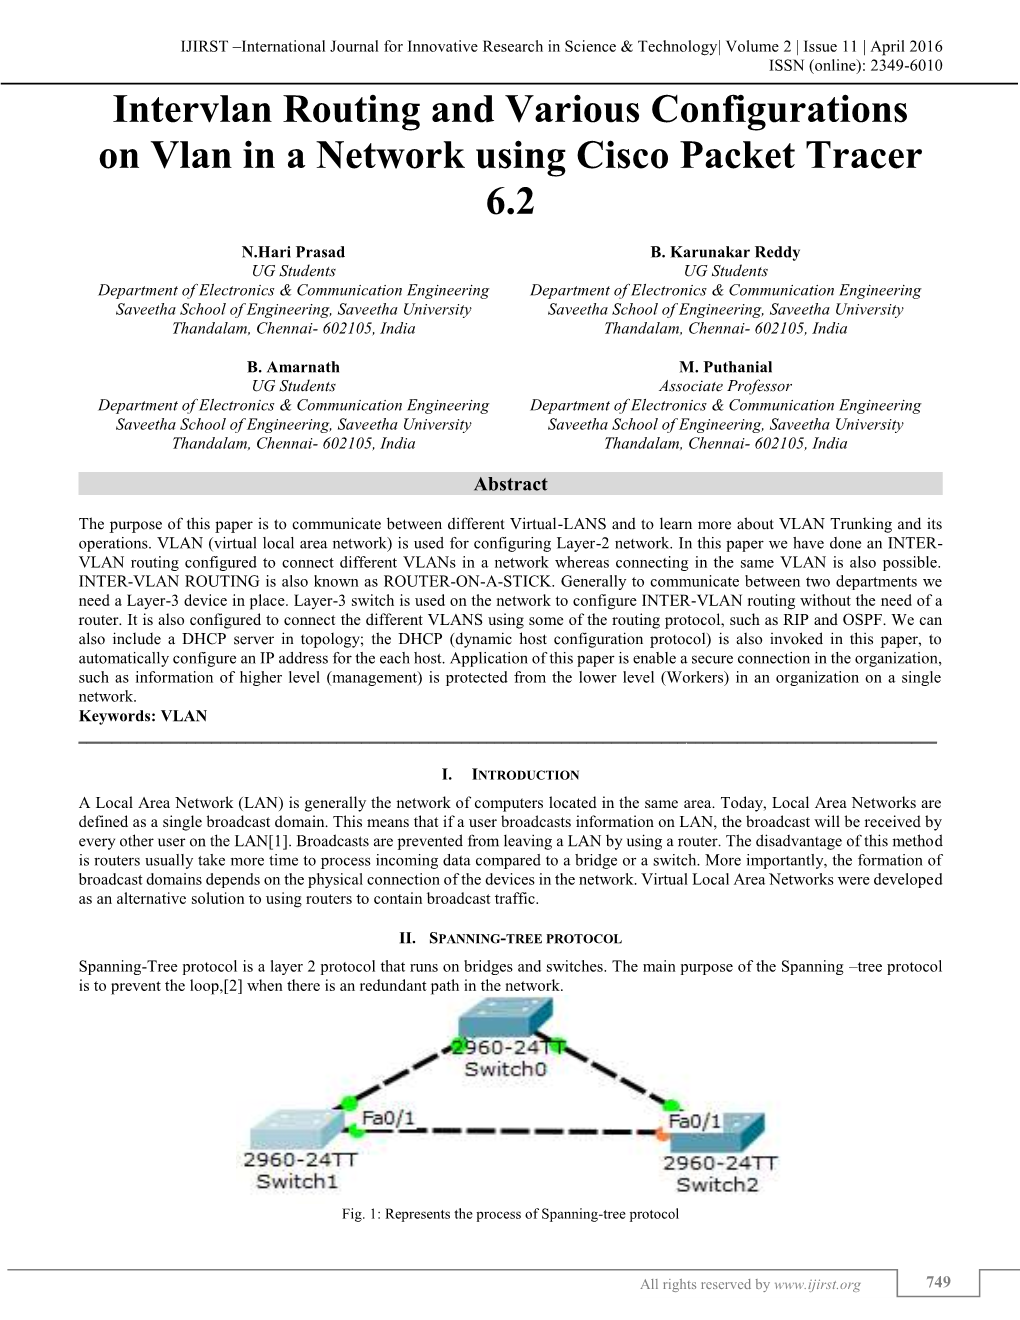 Intervlan Routing and Various Configurations on Vlan in a Network Using Cisco Packet Tracer